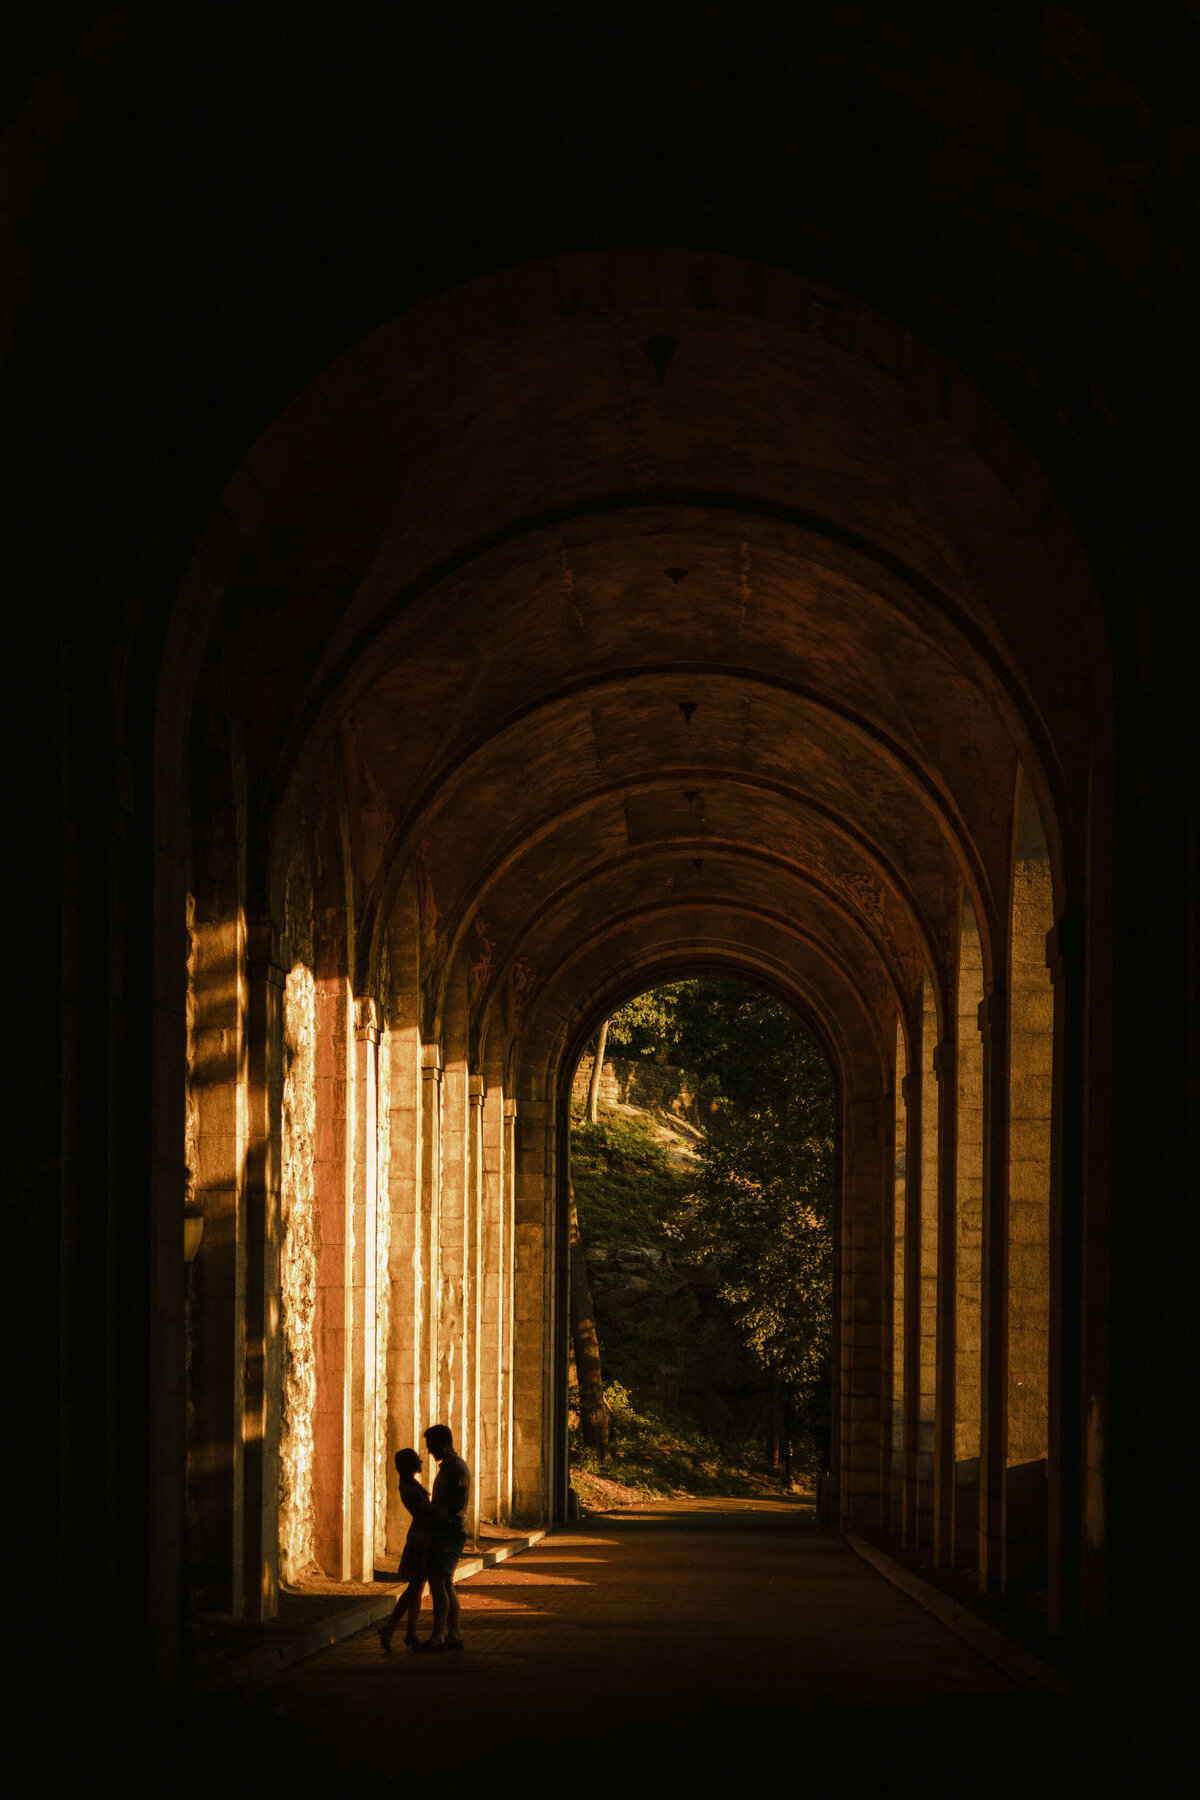 The silhouette of a couple standing together under a large arched walkway.